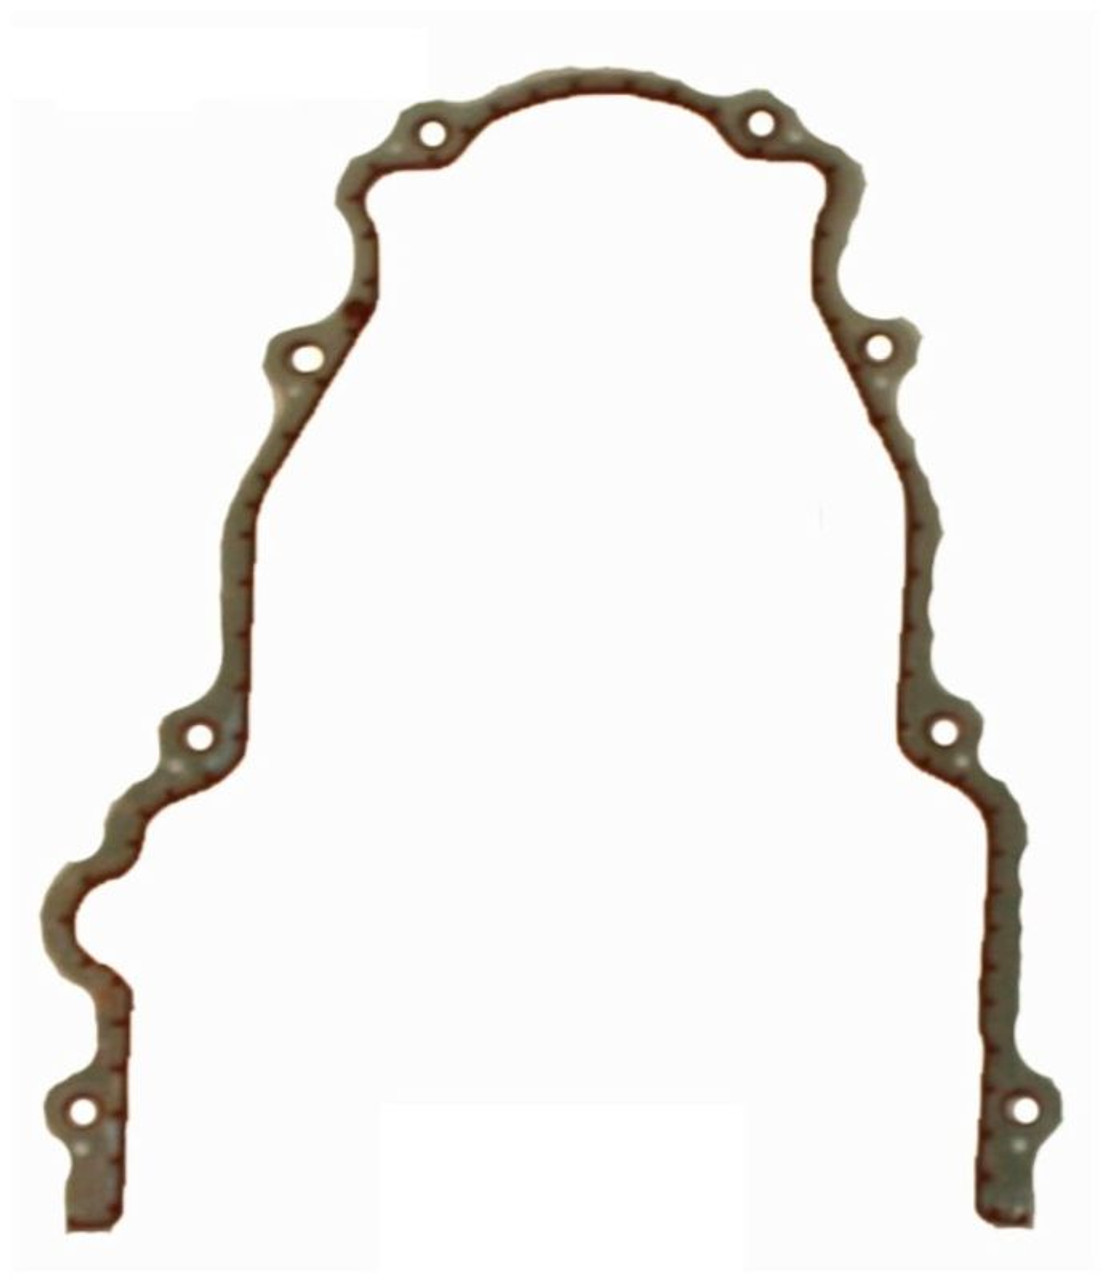 2012 Chevrolet Express 3500 6.0L Engine Timing Cover Gasket TCG293-A -775